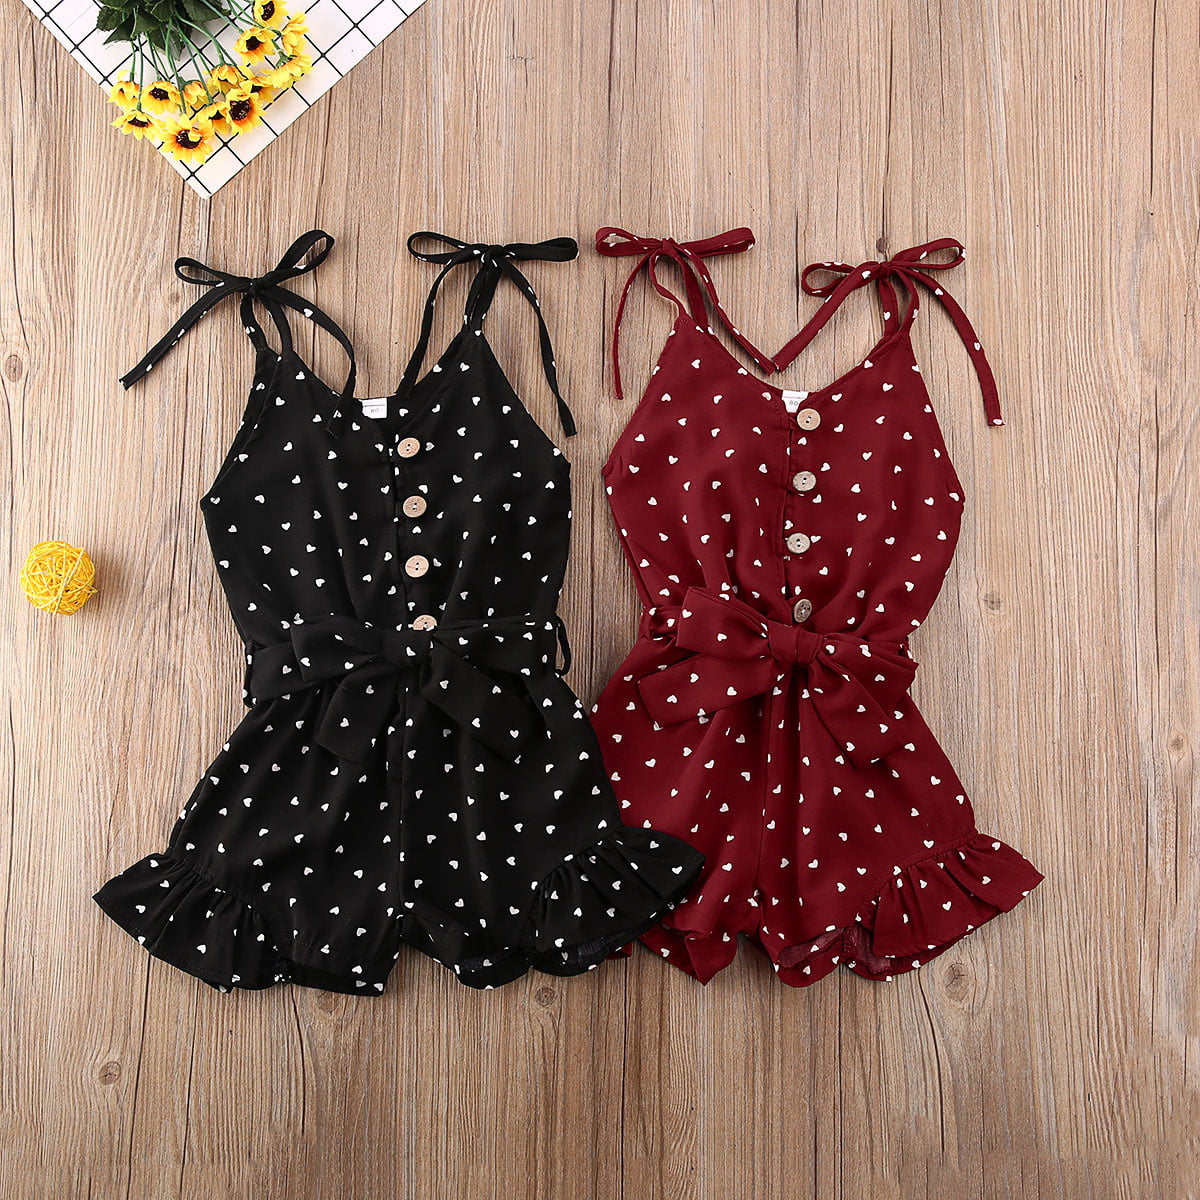 Toddler Infant Baby Girl Leopard Romper Summer Outfits Strap Sleeveless Jumpsuit Halter Playsuit Sunsuit Overall Clothes Set 